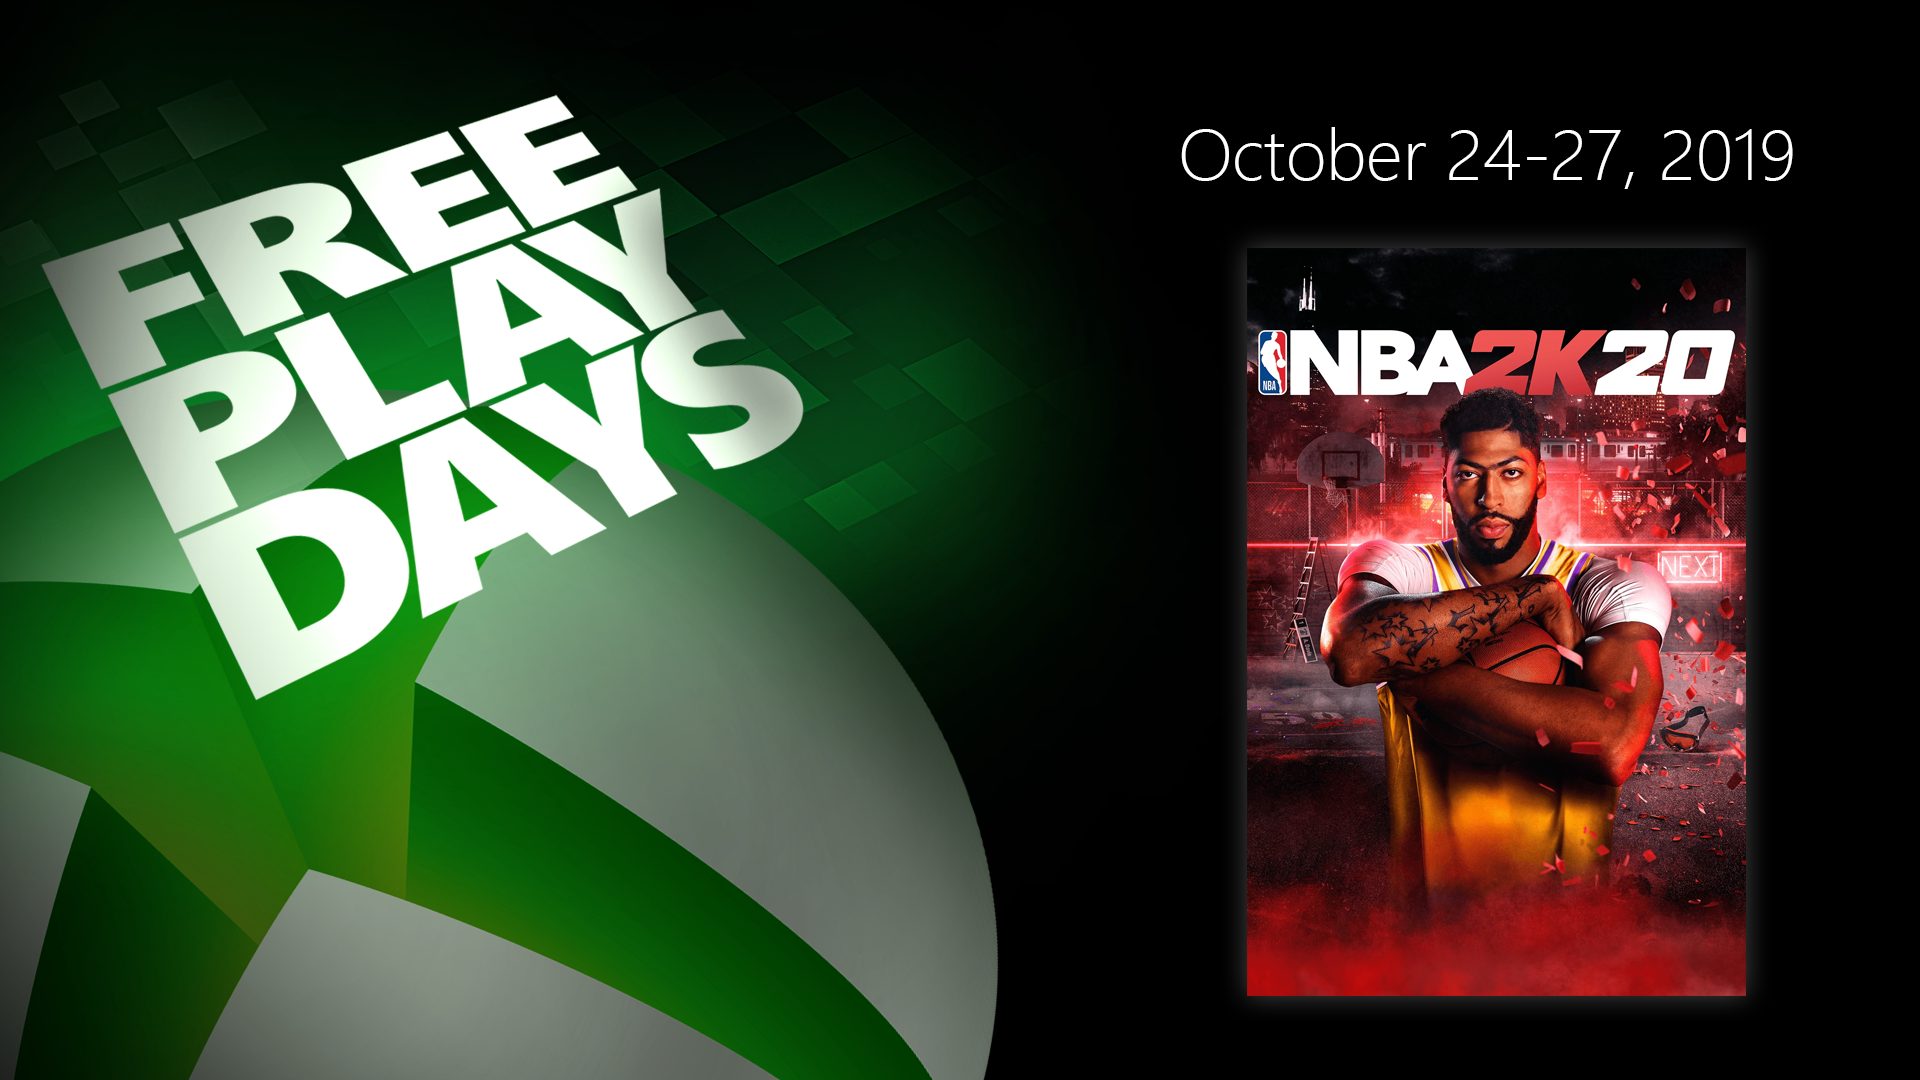 Xbox Free Play Days for NBA 2K20